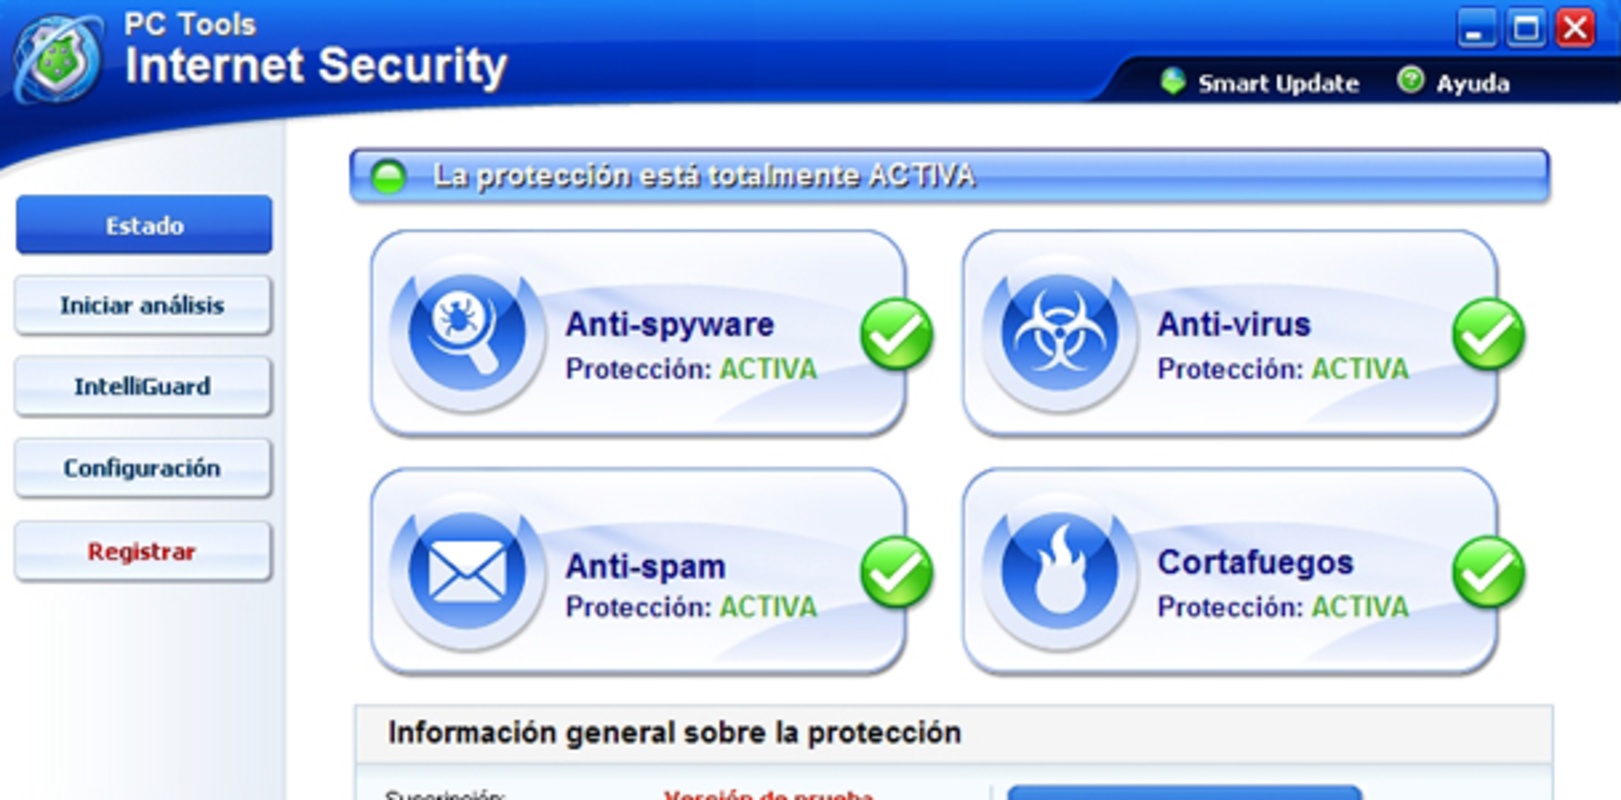 PC Tools Internet Security 2010 feature